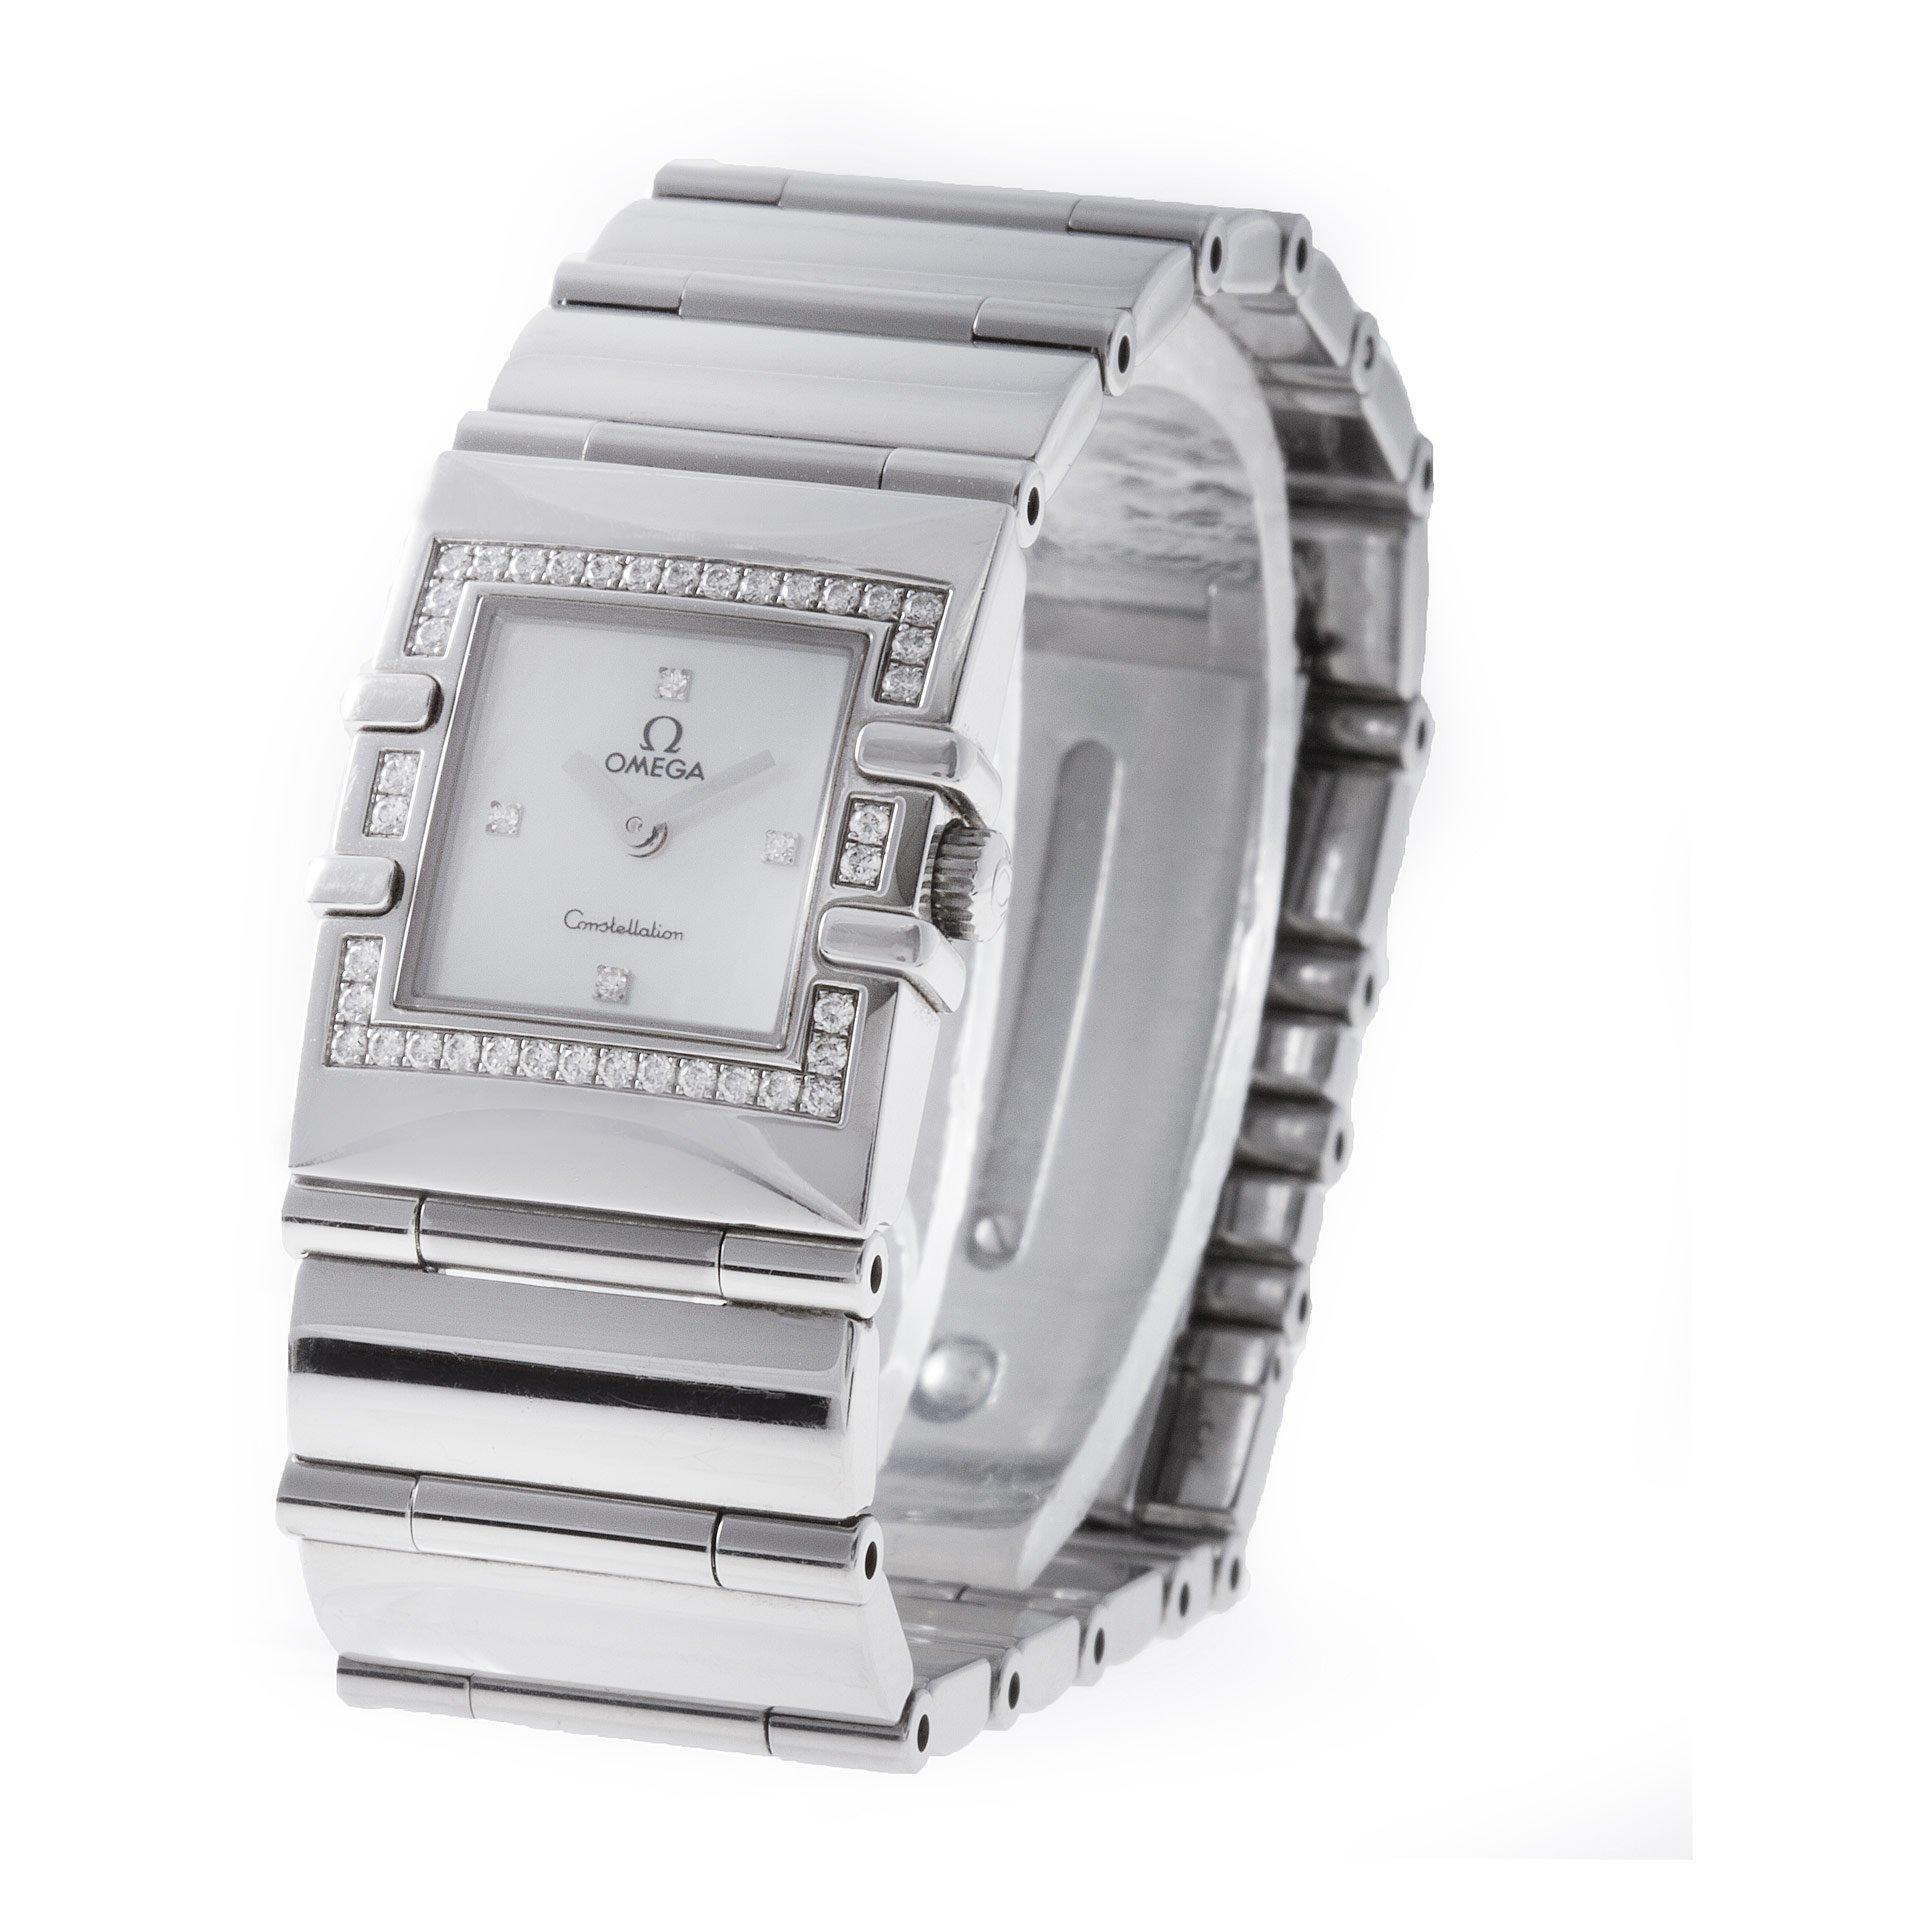 Omega Constellation Quadra in stainless steel with Mother of Pearl diamond dial and diamond bezel. Quartz. 19 mm x 24 mm case size. Ref 1528.76.00. Fine Pre-owned Omega Watch.

Certified preowned Classic Omega Constellation 1528.76.00 watch is made